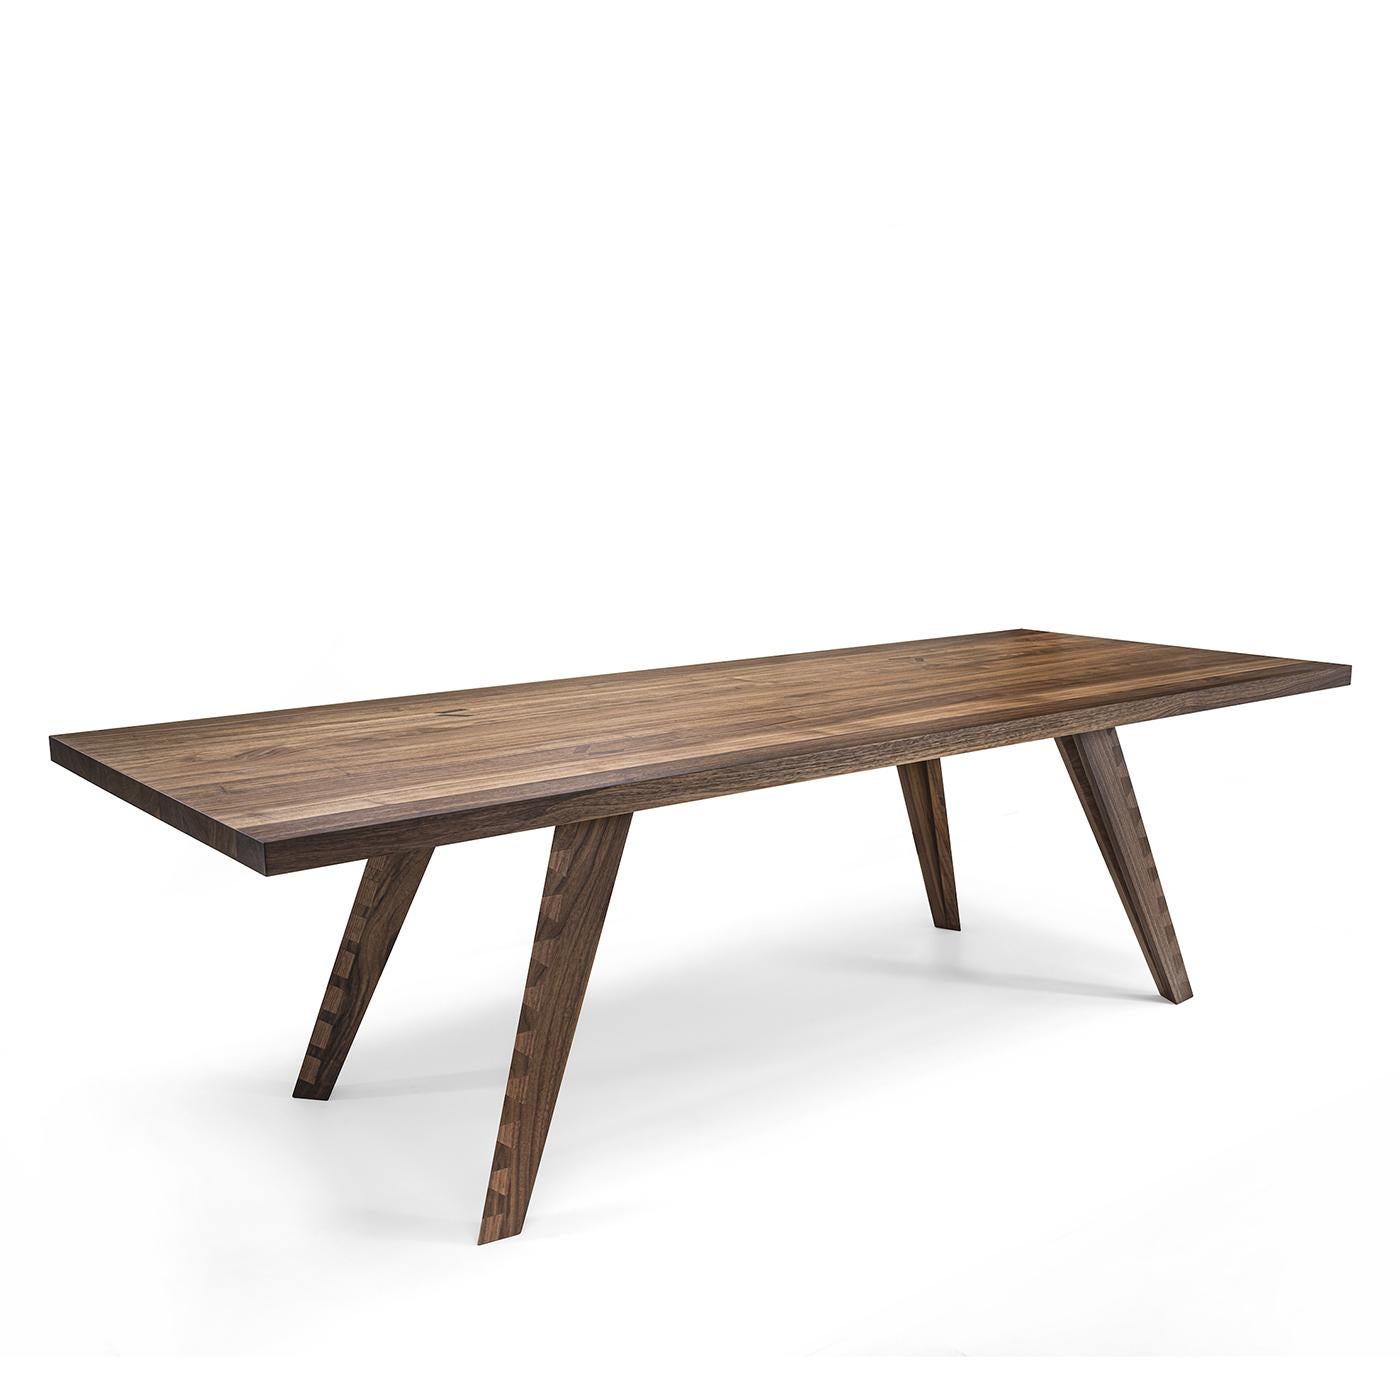 Table walnut grove with all structure in solid
walnut wood. Feet with dovetail hand-crafted
work underlining the table base.
Also available all in solid oak wood in natural finish.
Available in :
L 200 x D 100 x H 75cm, price: 12250,00€
L 220